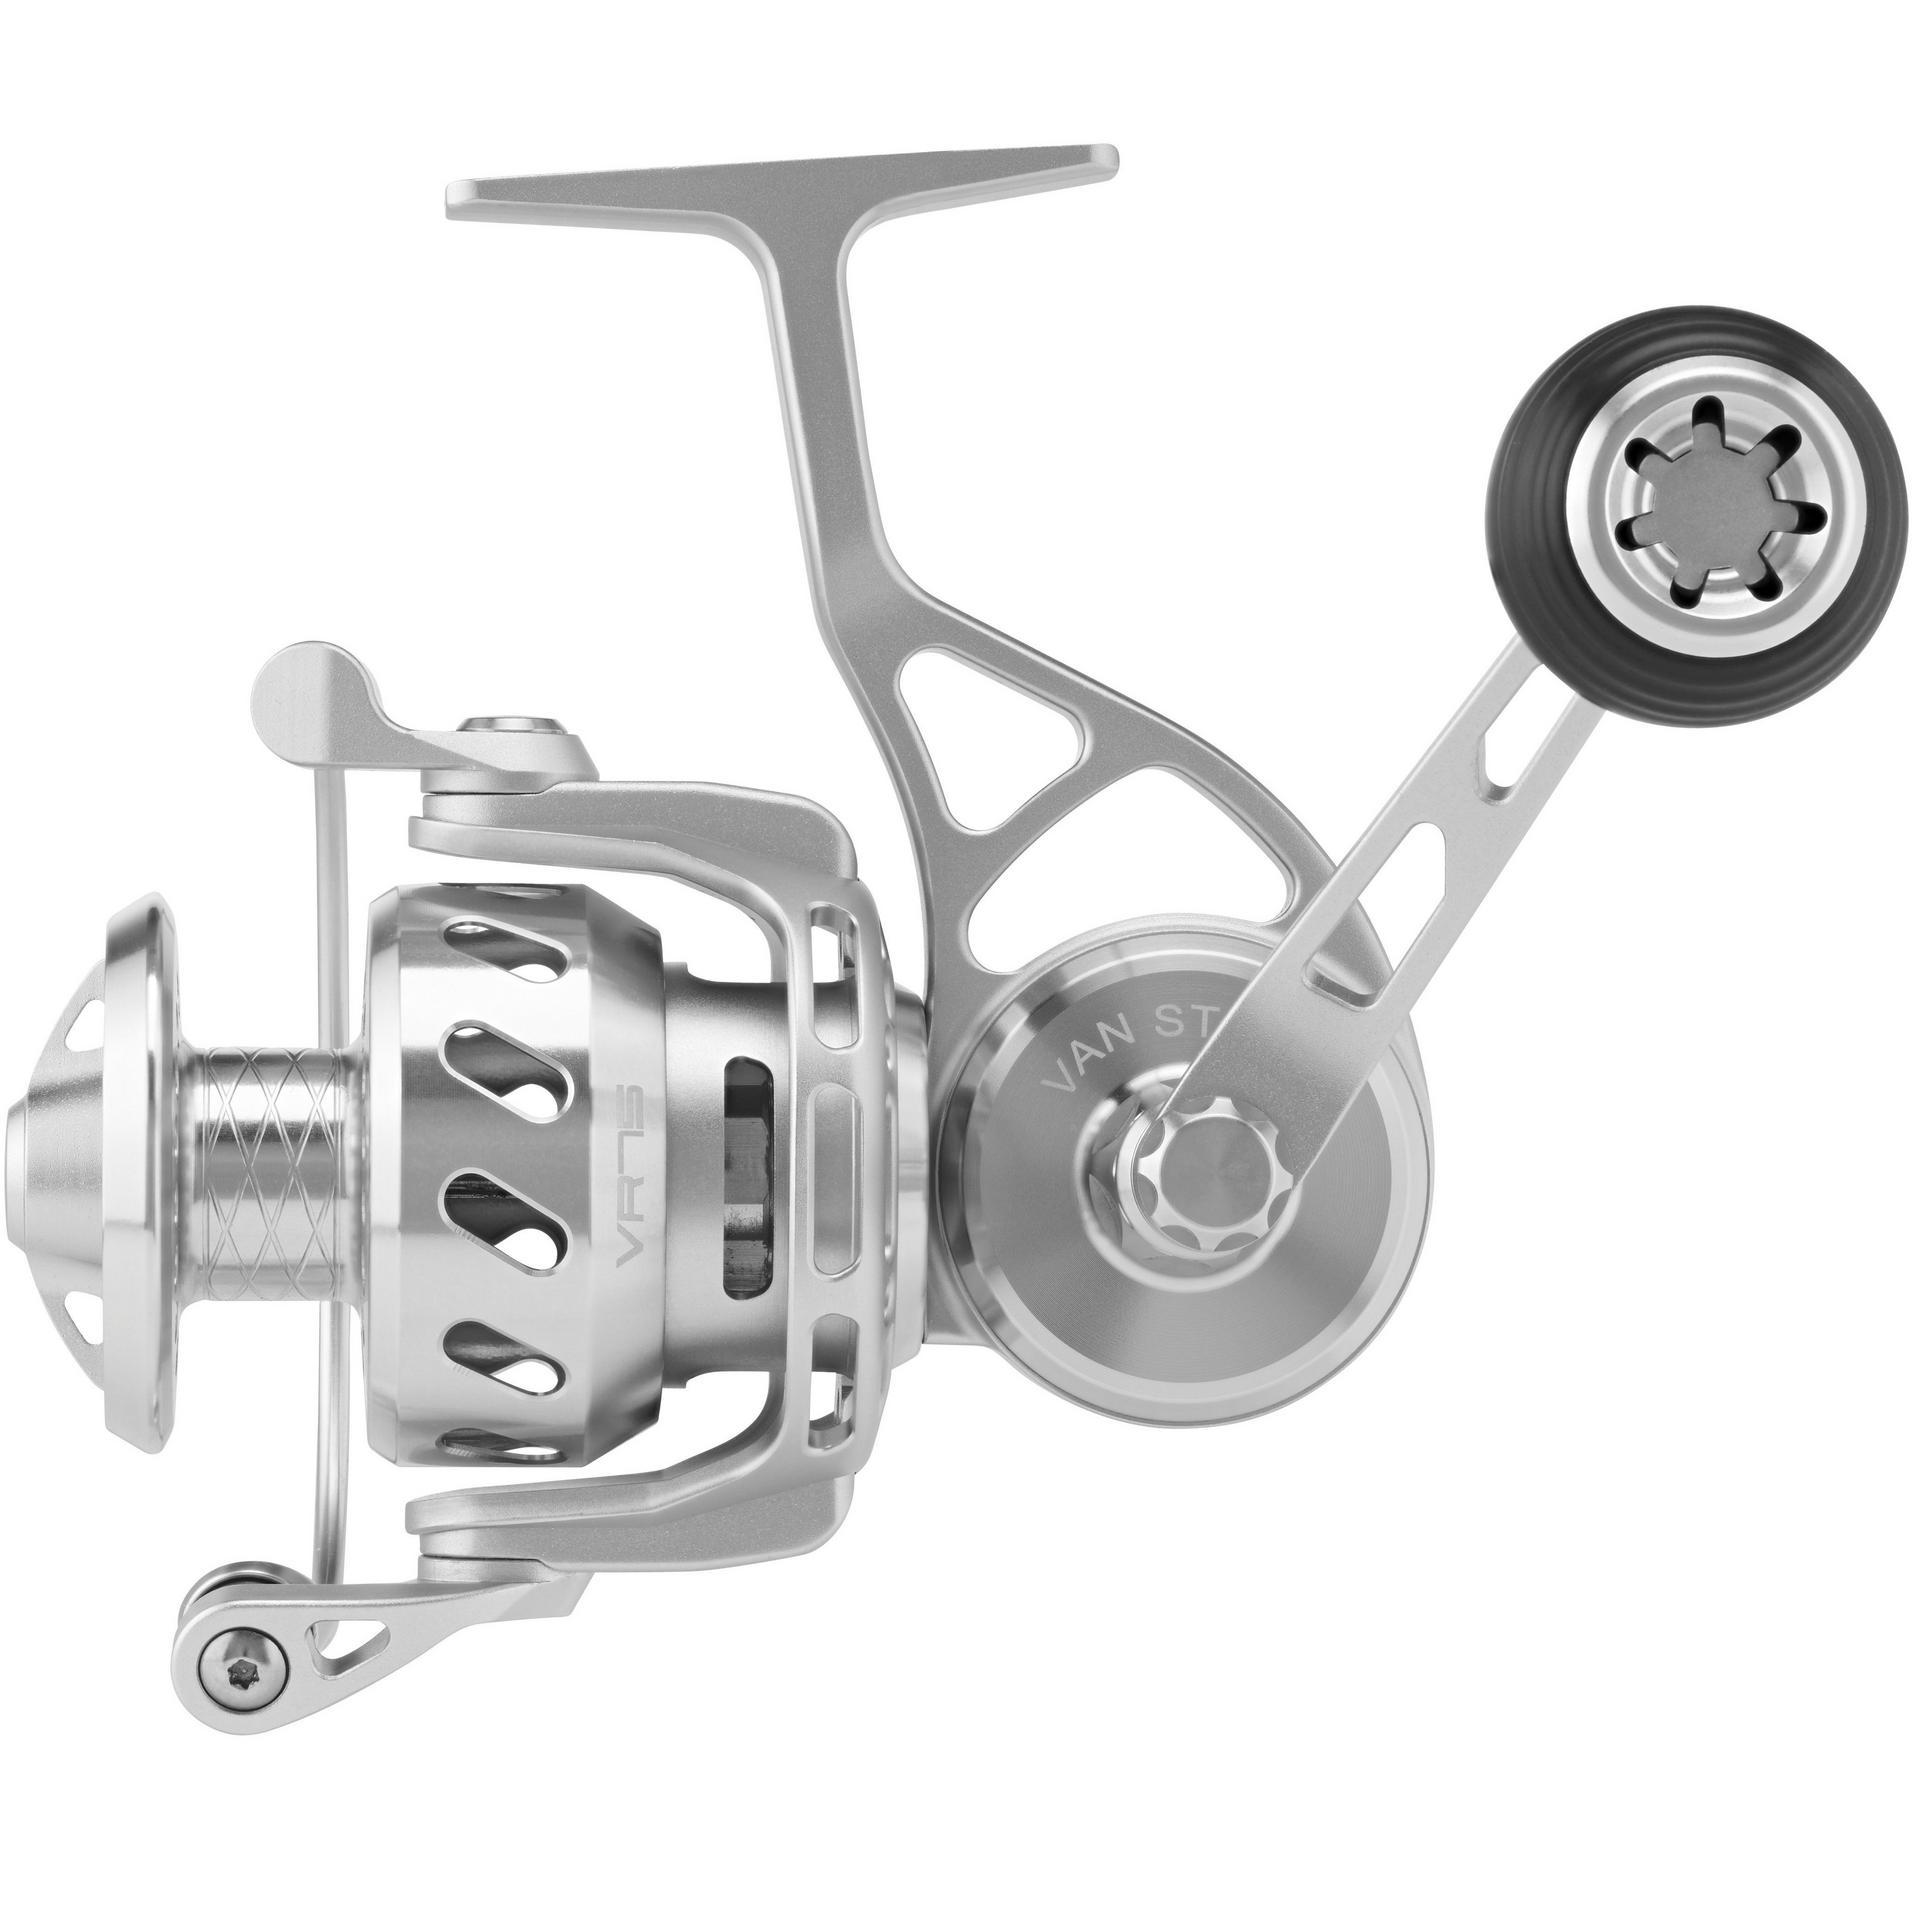 Van Staal VR75 Spinning Reels with a FREE Dark Matter Bonefish Travel  Spinning Rod is back in stock. Get yours before they sell out!